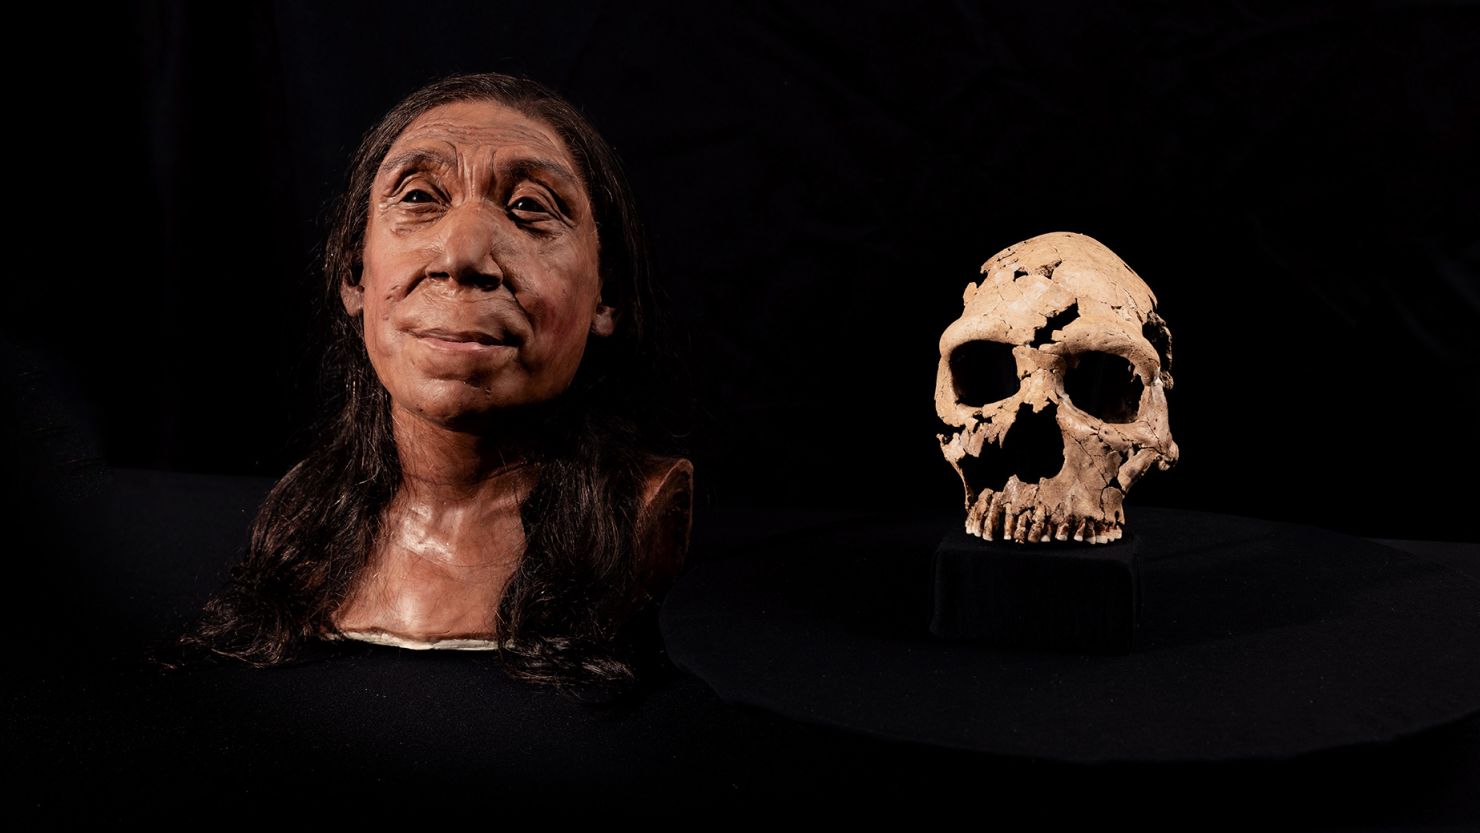 Researchers unearthed the skull used in the reconstruction in 2018. Subsequent analysis revealed it belonged to a Neanderthal woman, who would have been in her mid-40s when she died.